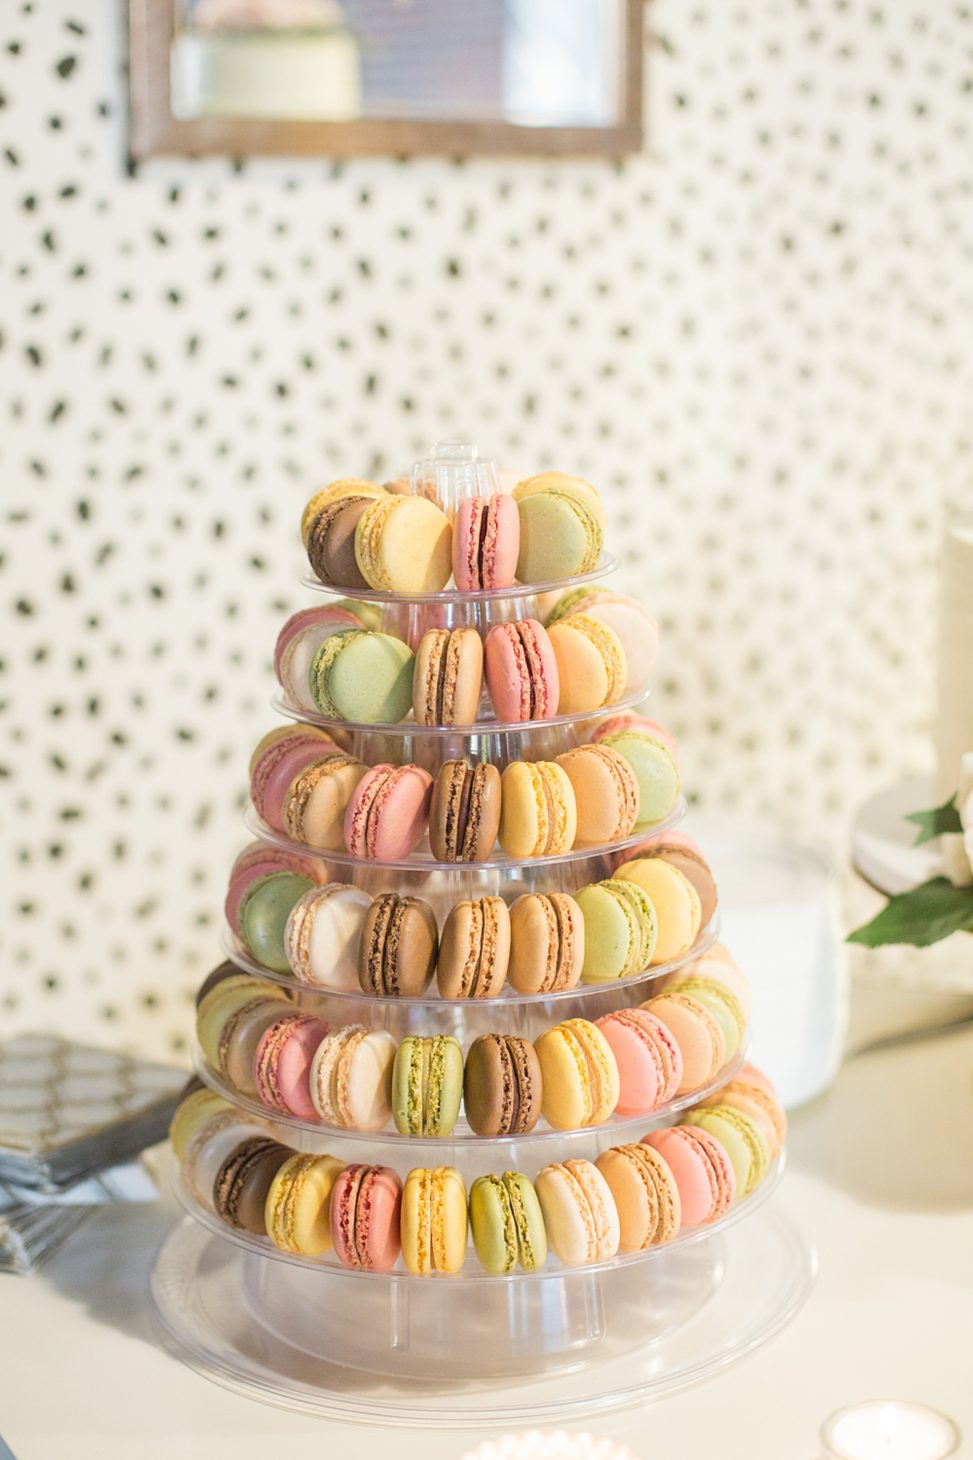 The was also a macaron tower served with the cake